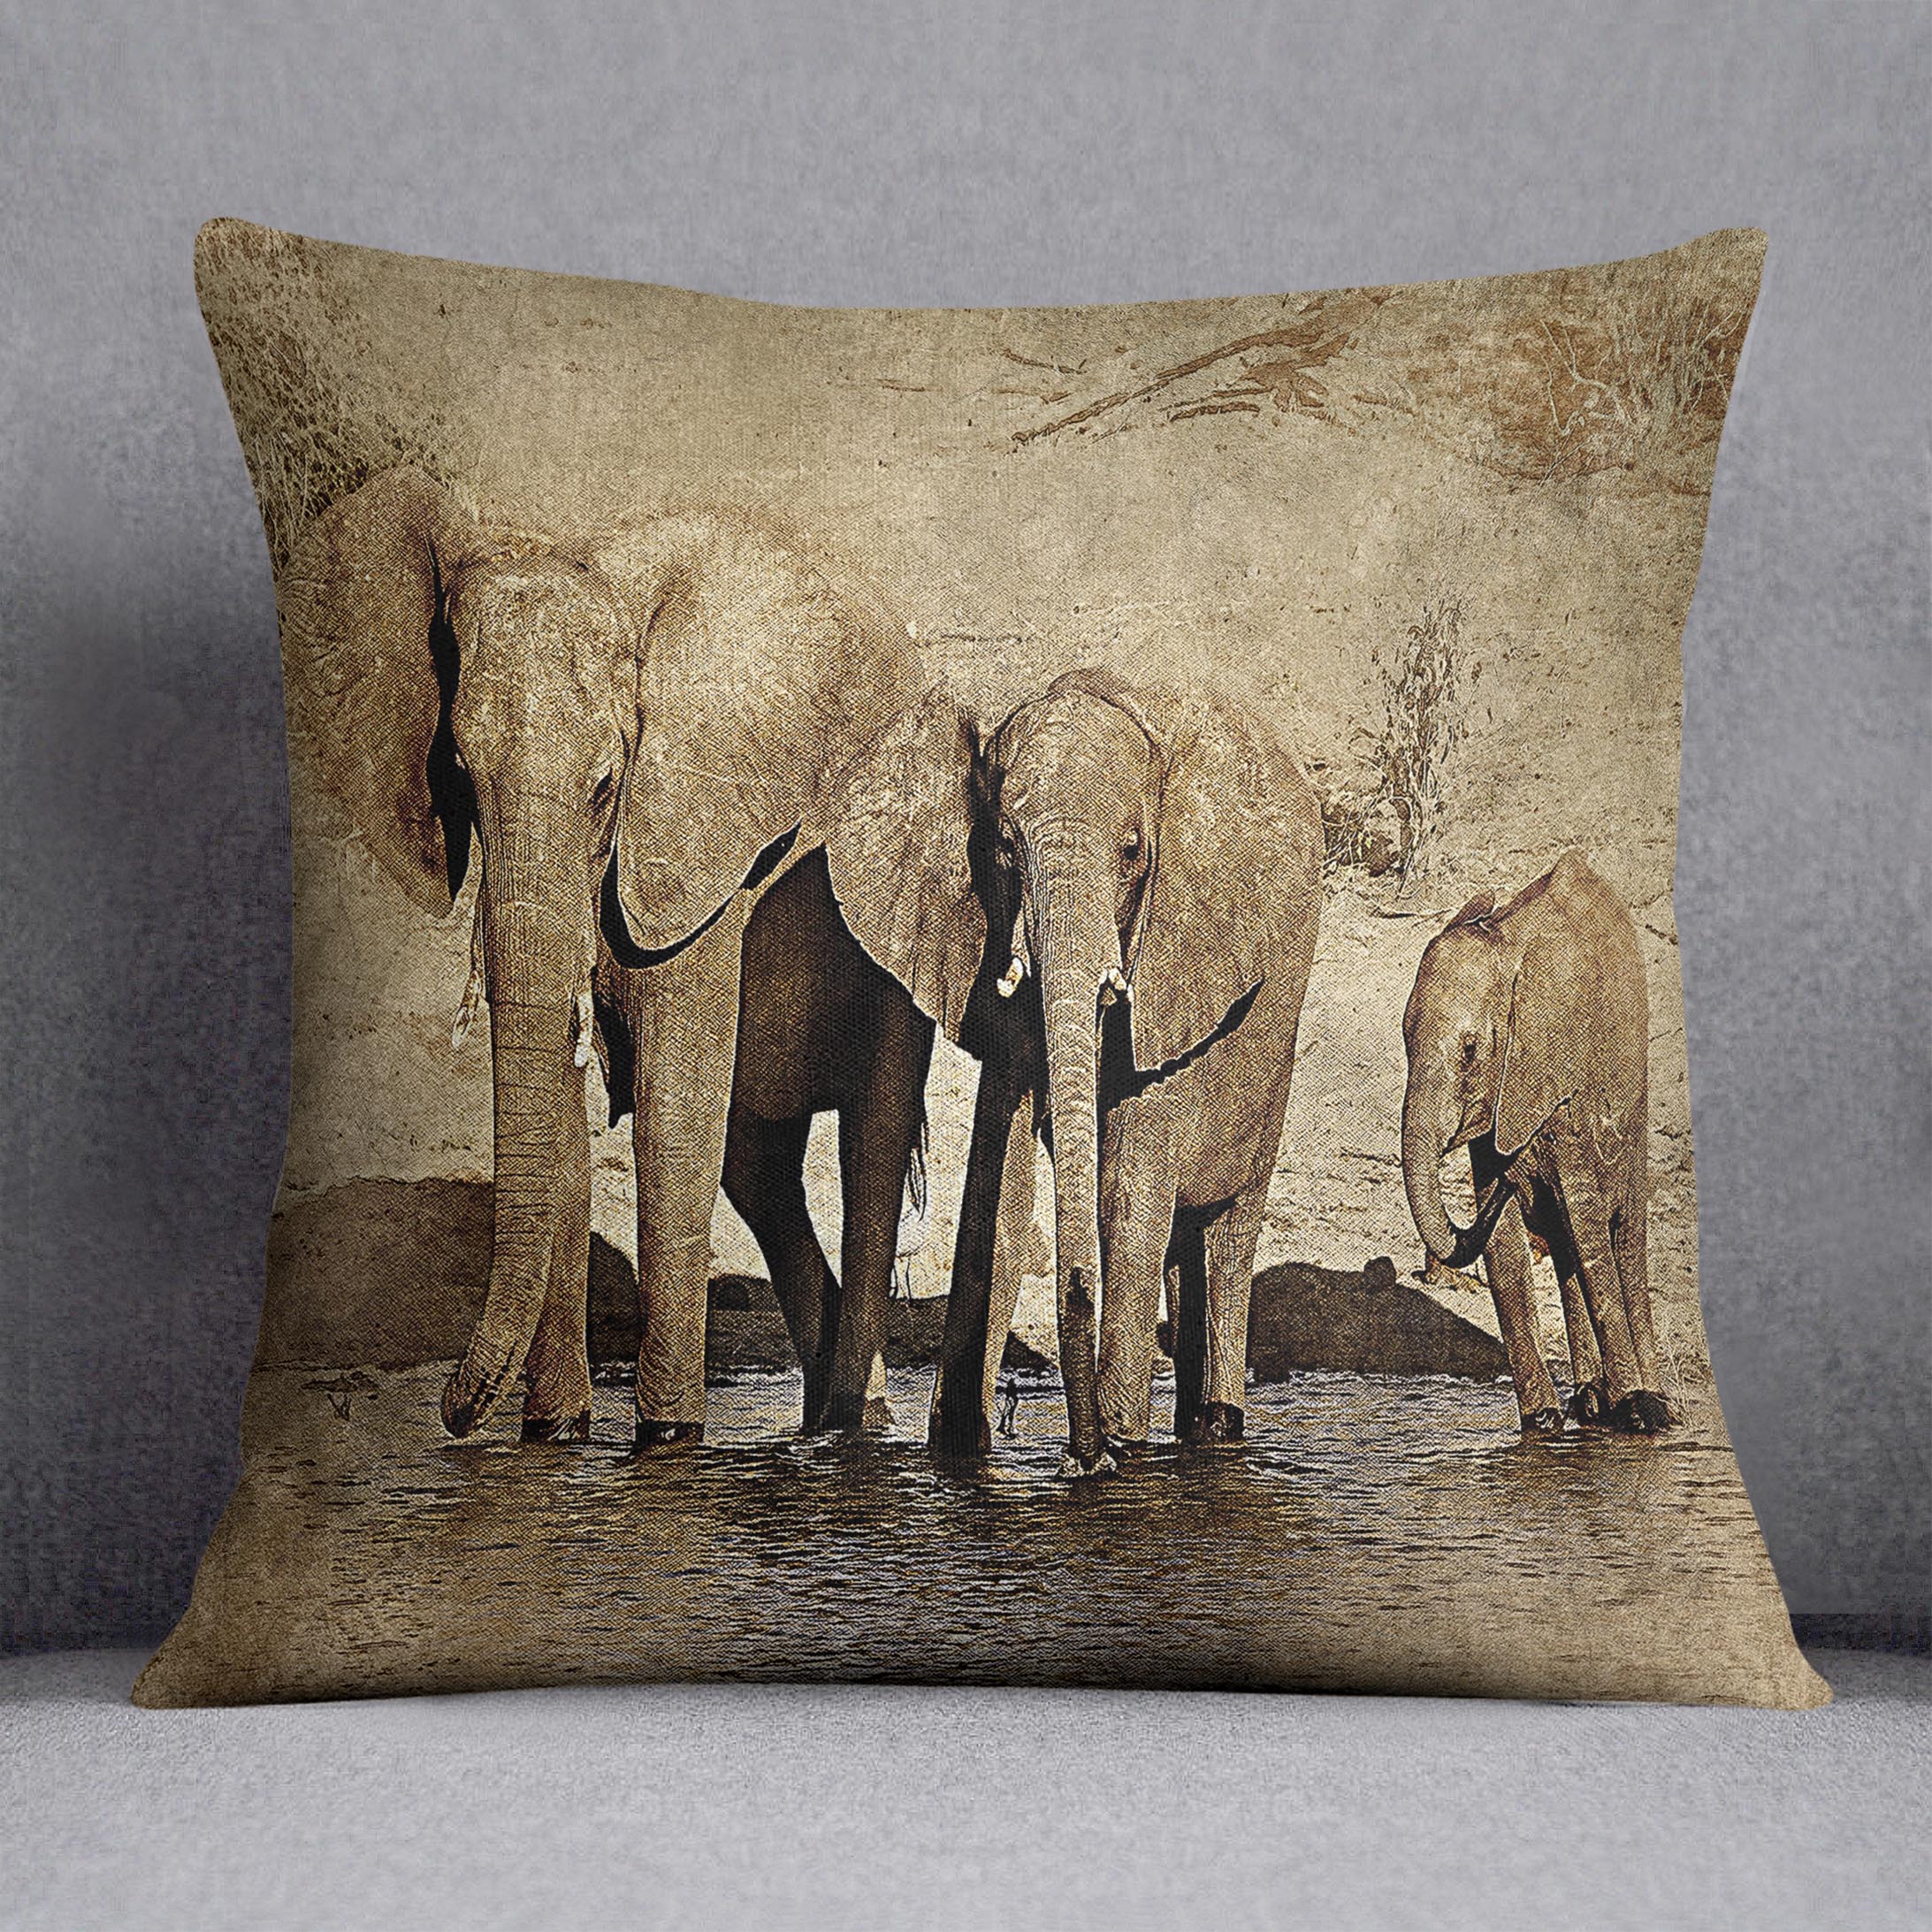 The Elephants March Version 2 Cushion